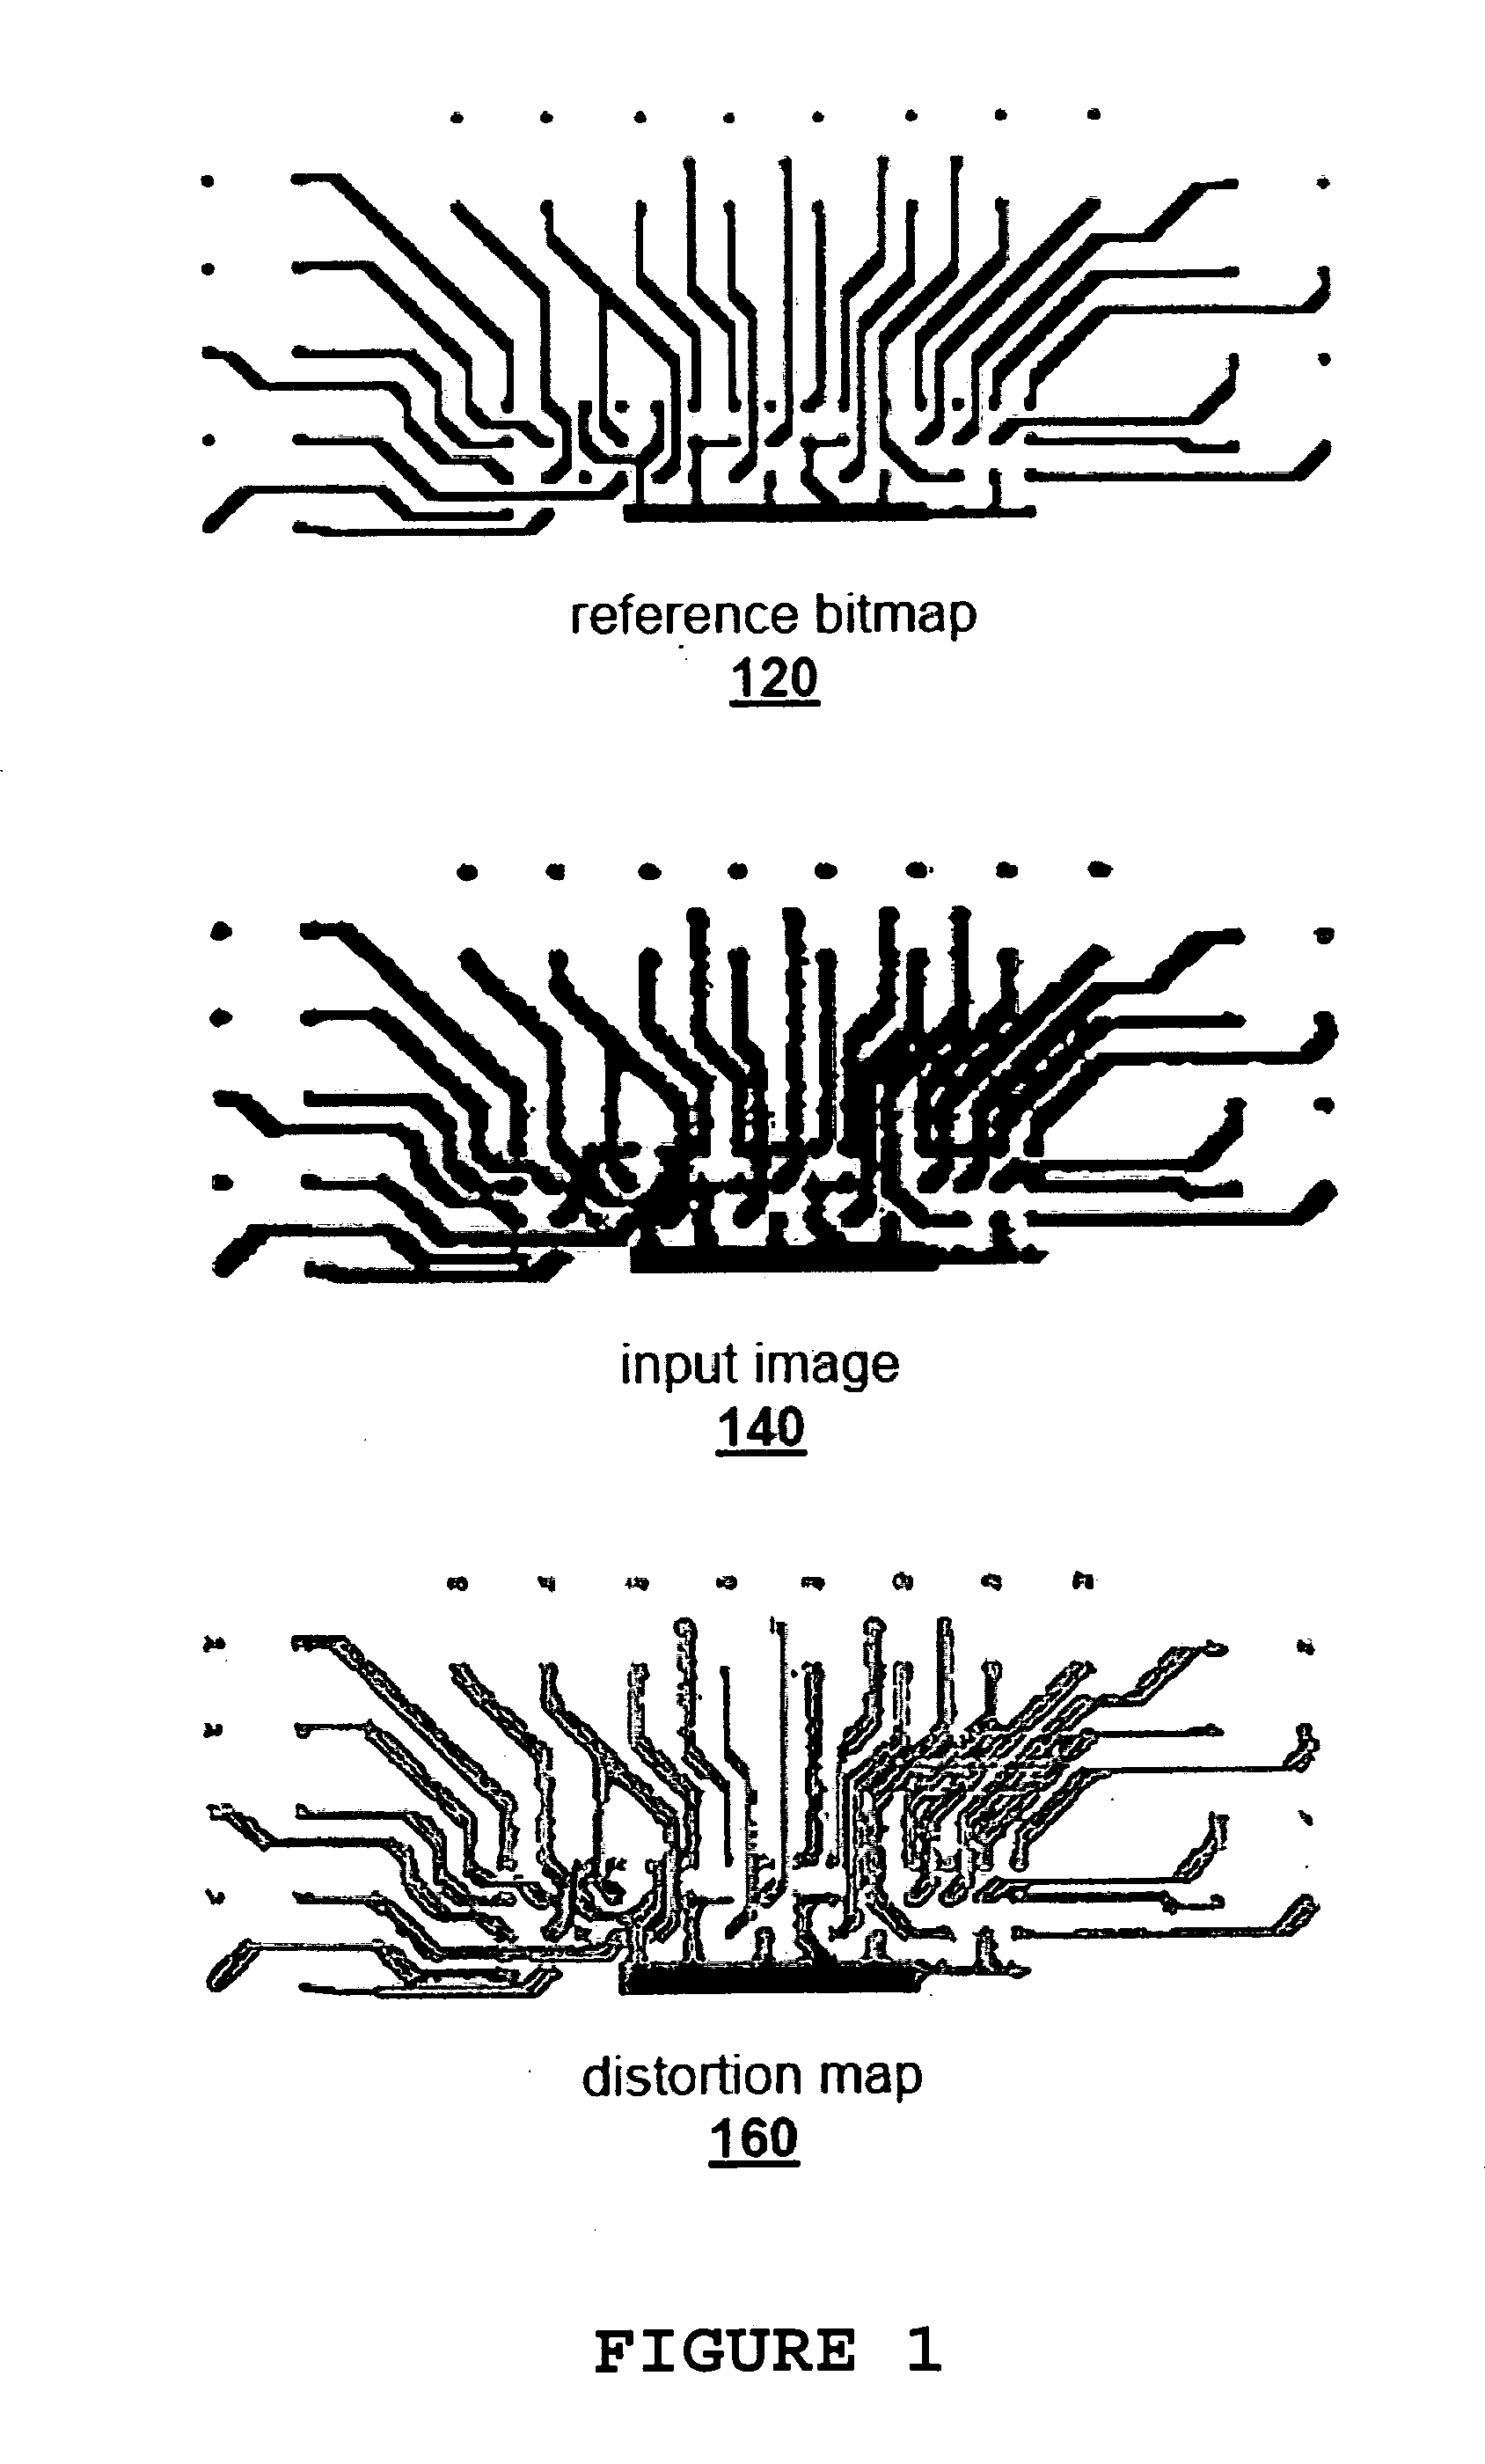 Fault Detection of a Printed Dot-Pattern Bitmap